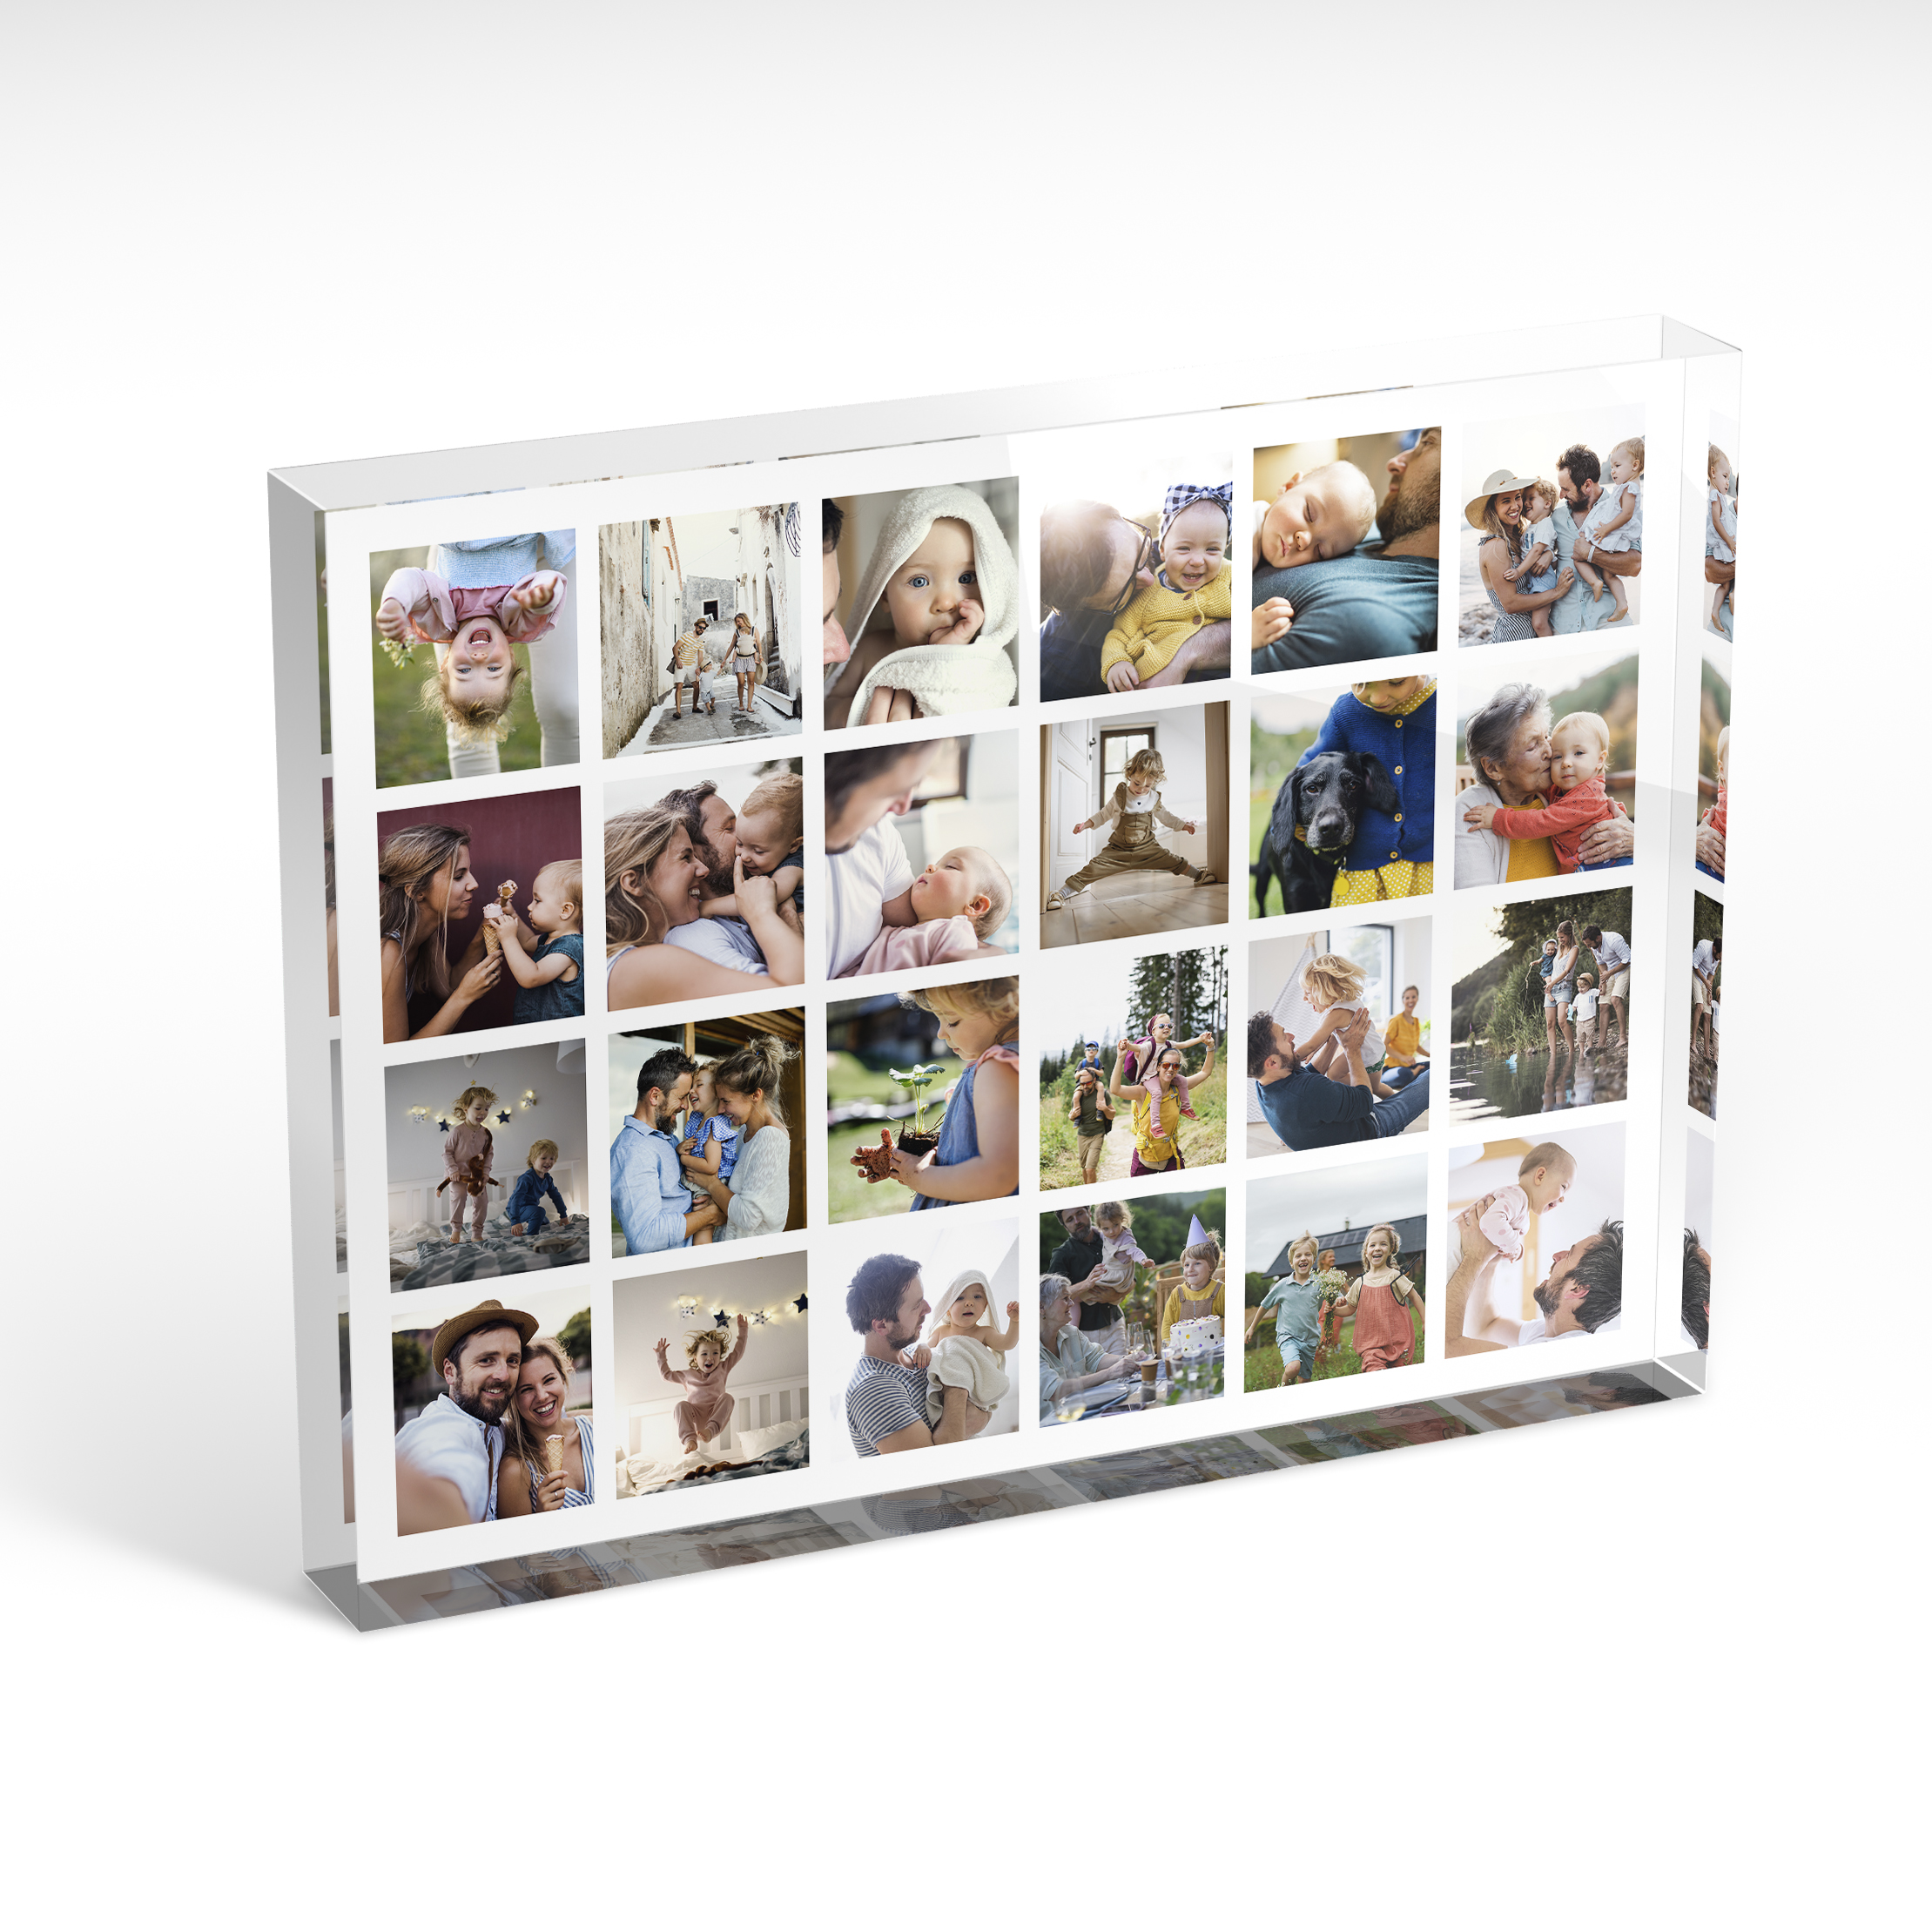 A front side view of a landscape layout Acrylic Photo Block with space for 10+ photos. Thiis design is named 'Collage of Memories'. 